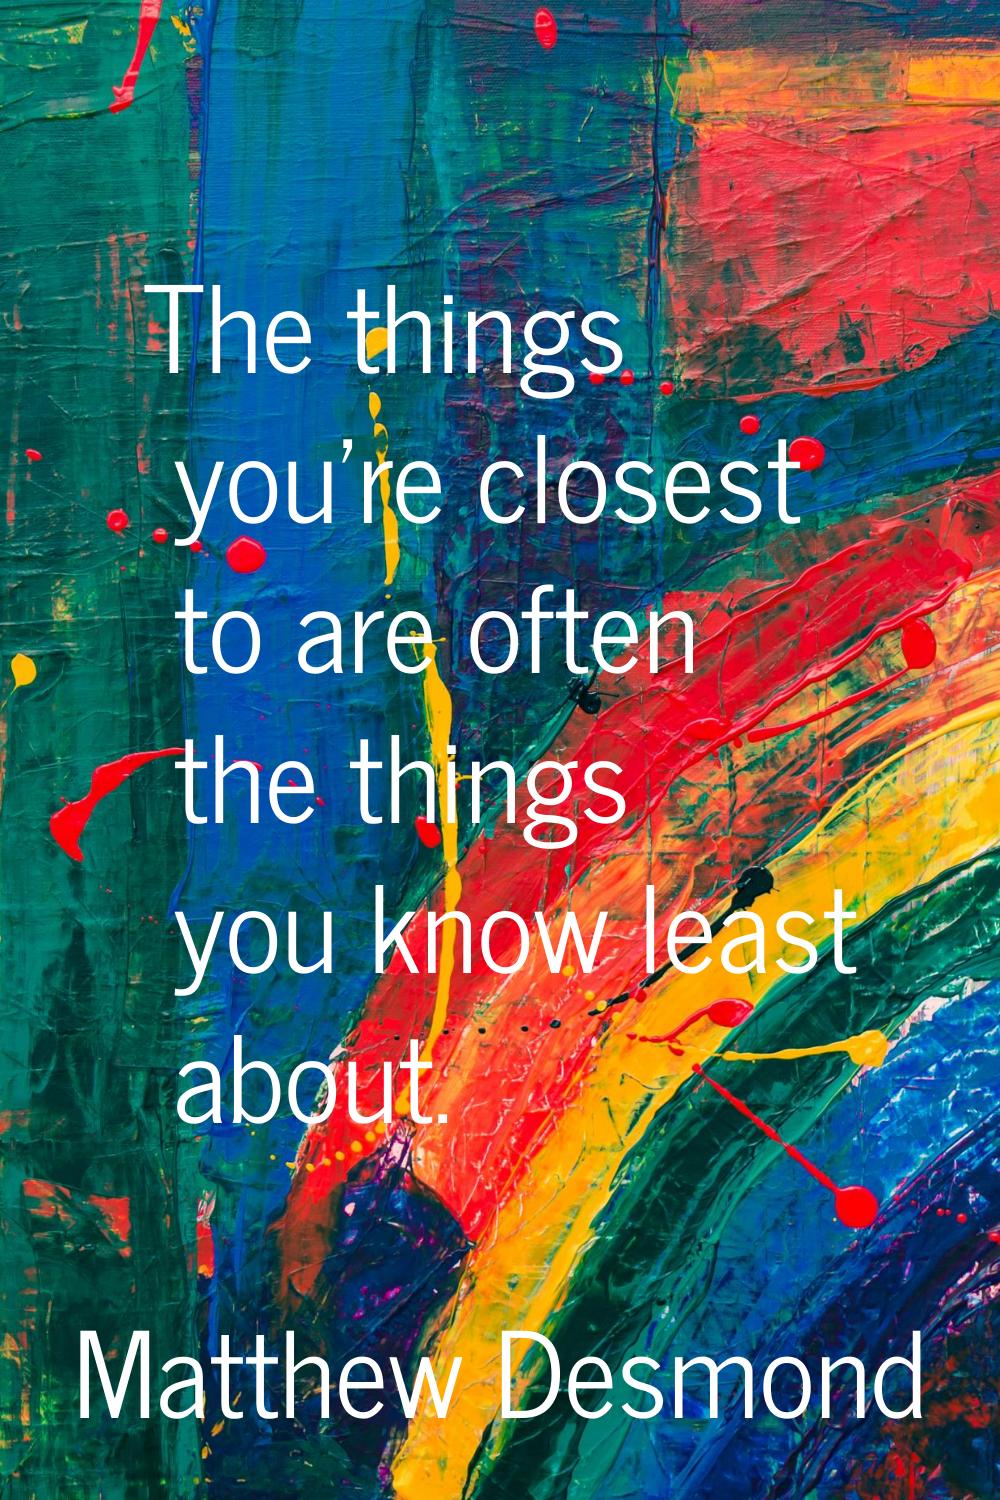 The things you're closest to are often the things you know least about.